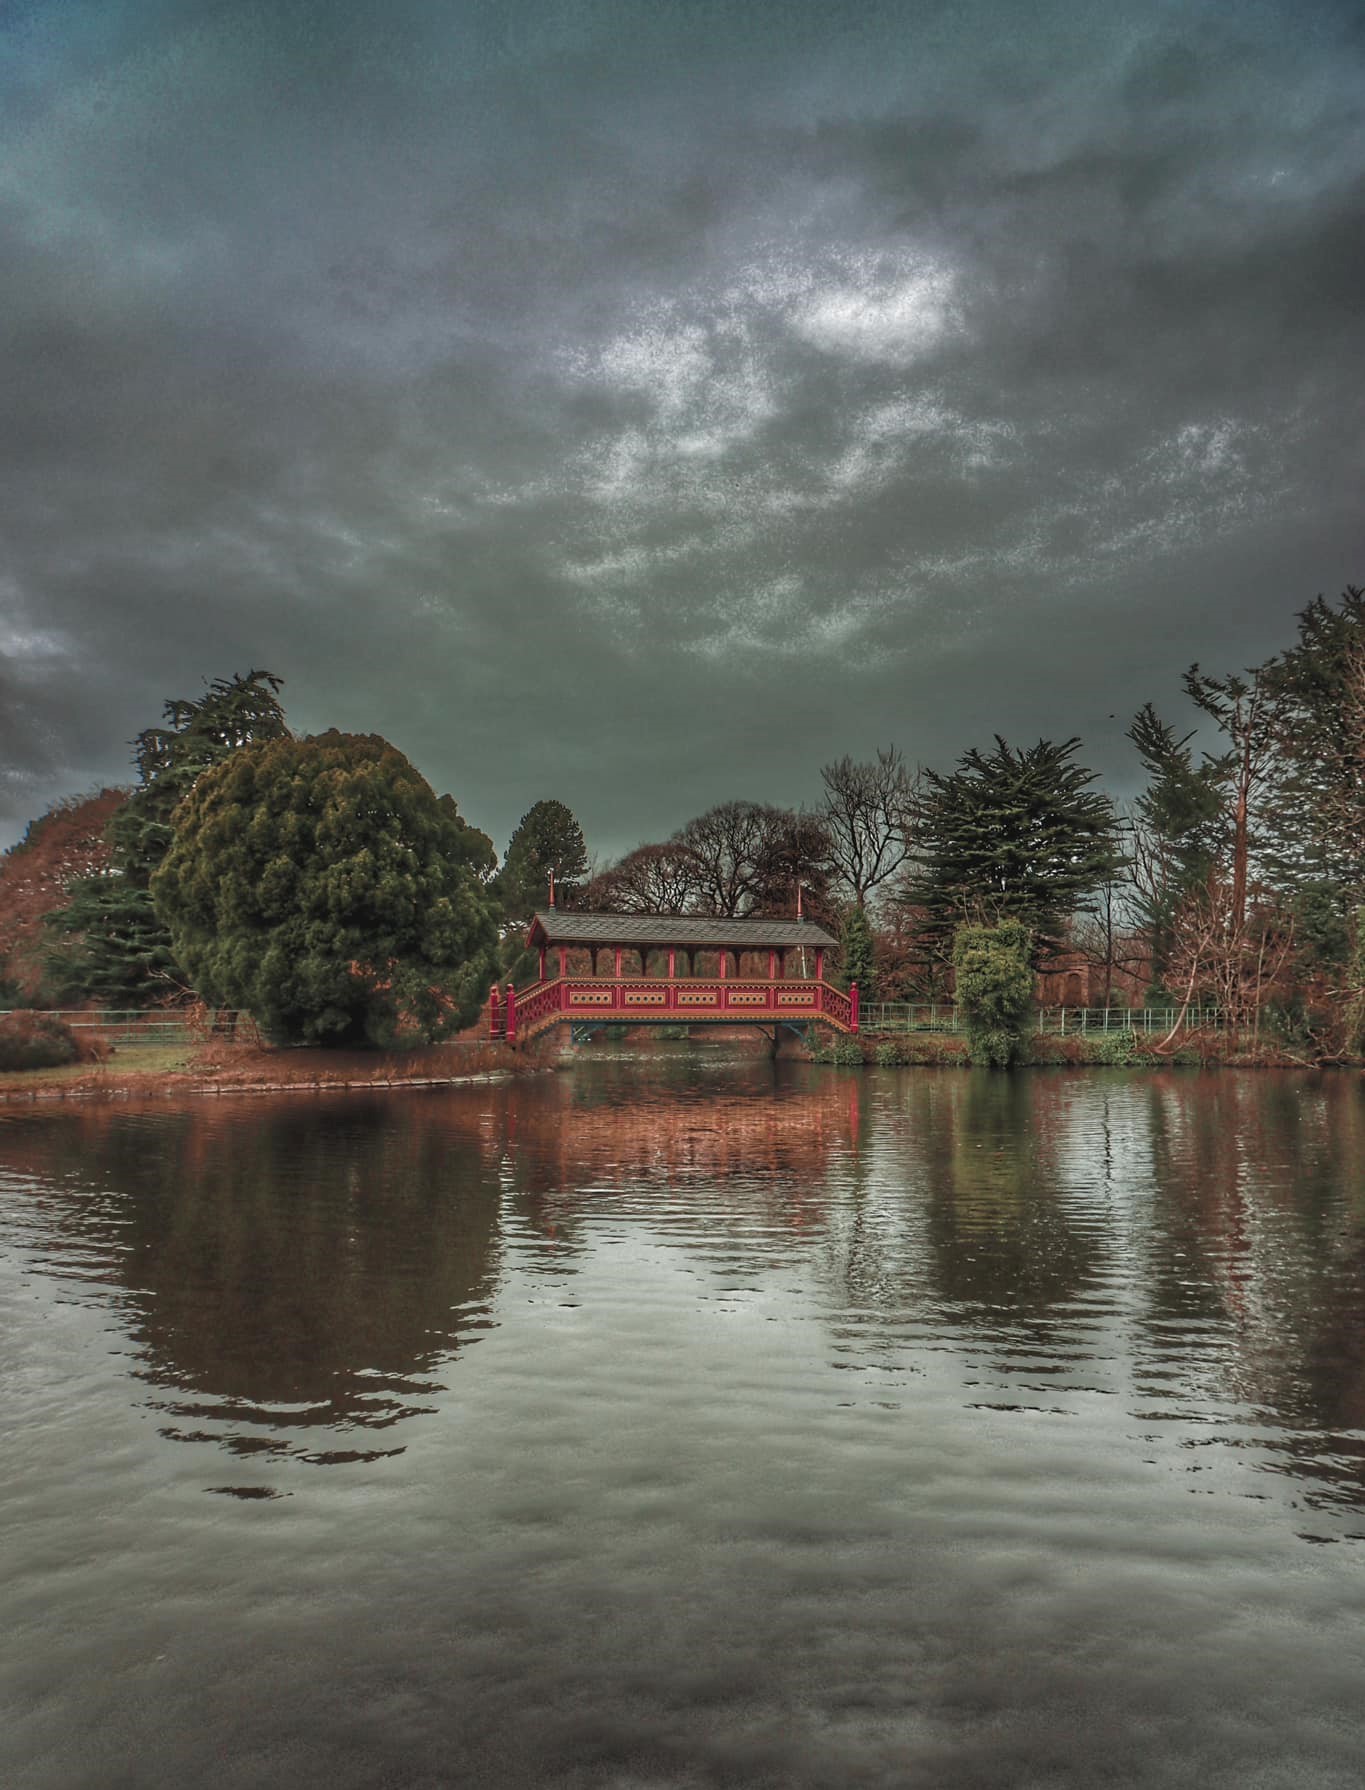 A storm is coming at Birkenhead Park by Allan Carruthers